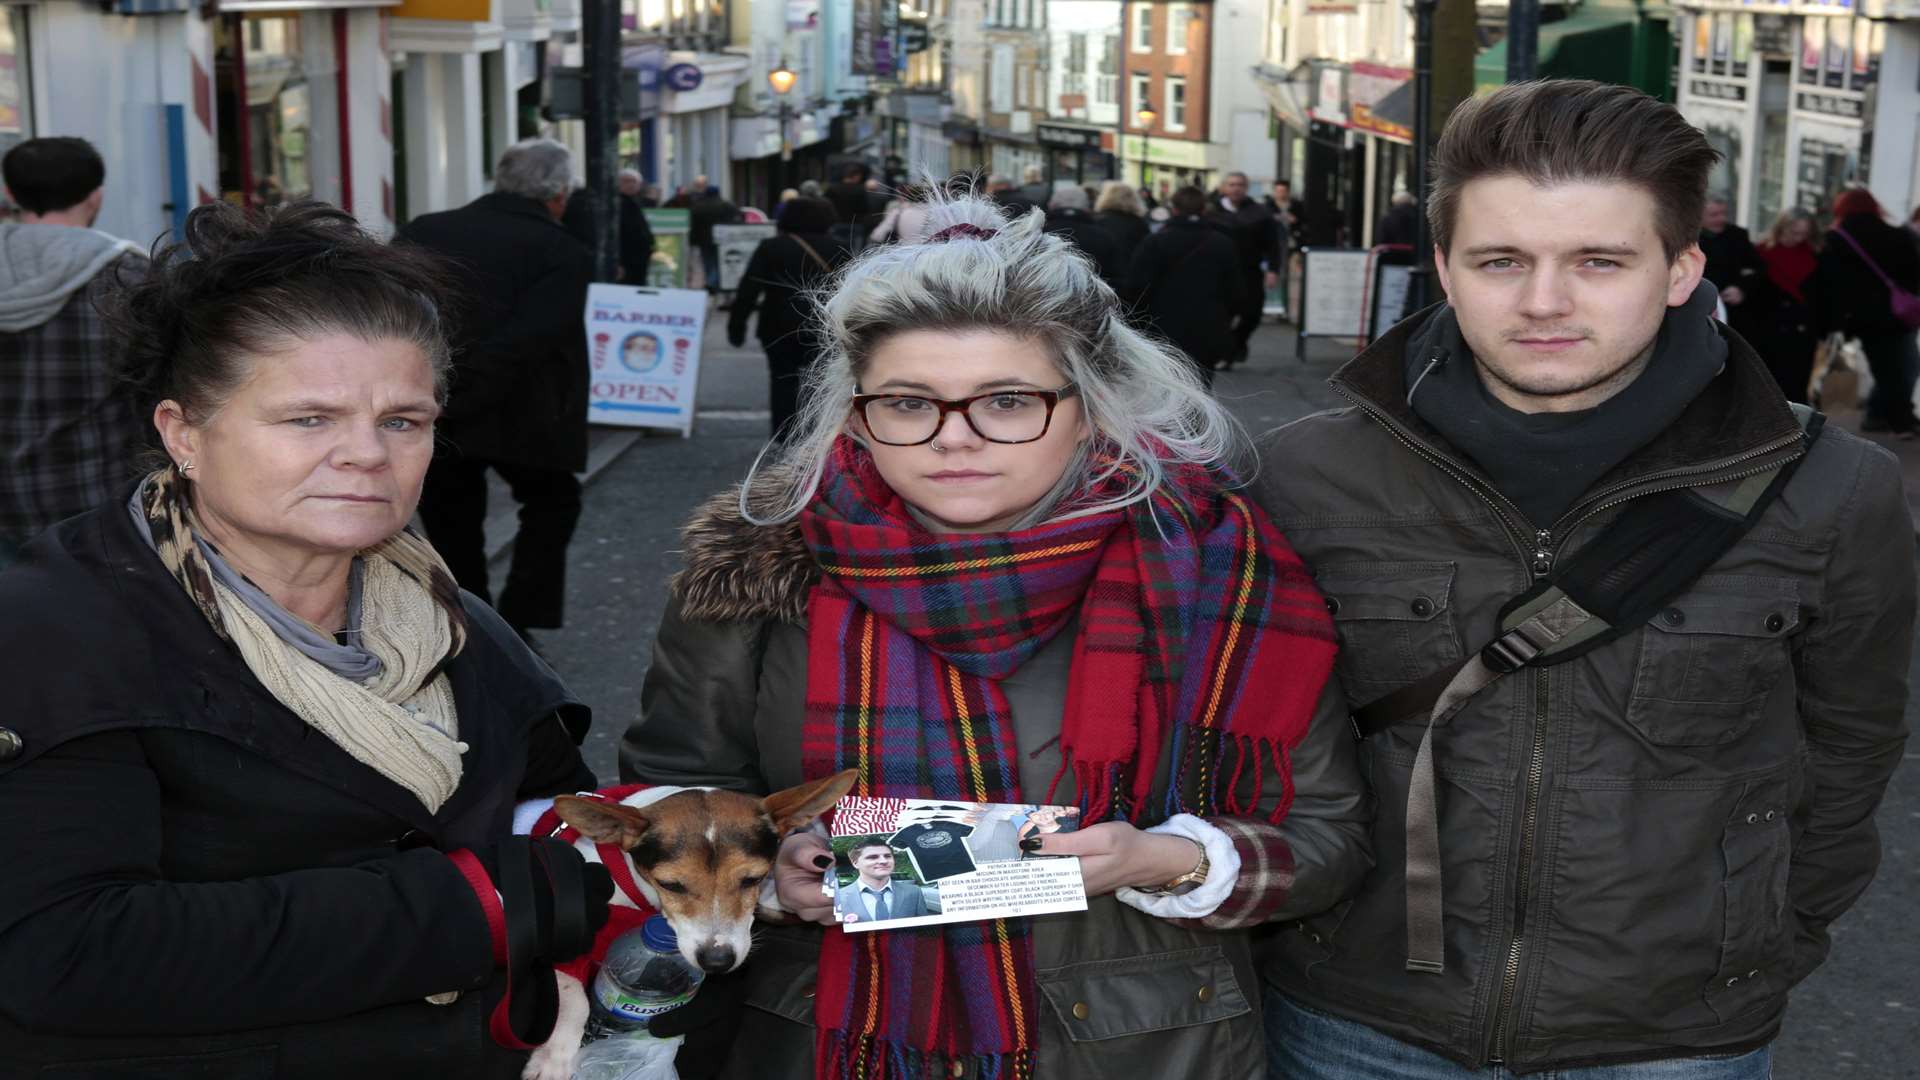 From left: mother Sharon Lamb, sister Zoe Lamb, and brother Paul Lamb appeal for information in Maidstone